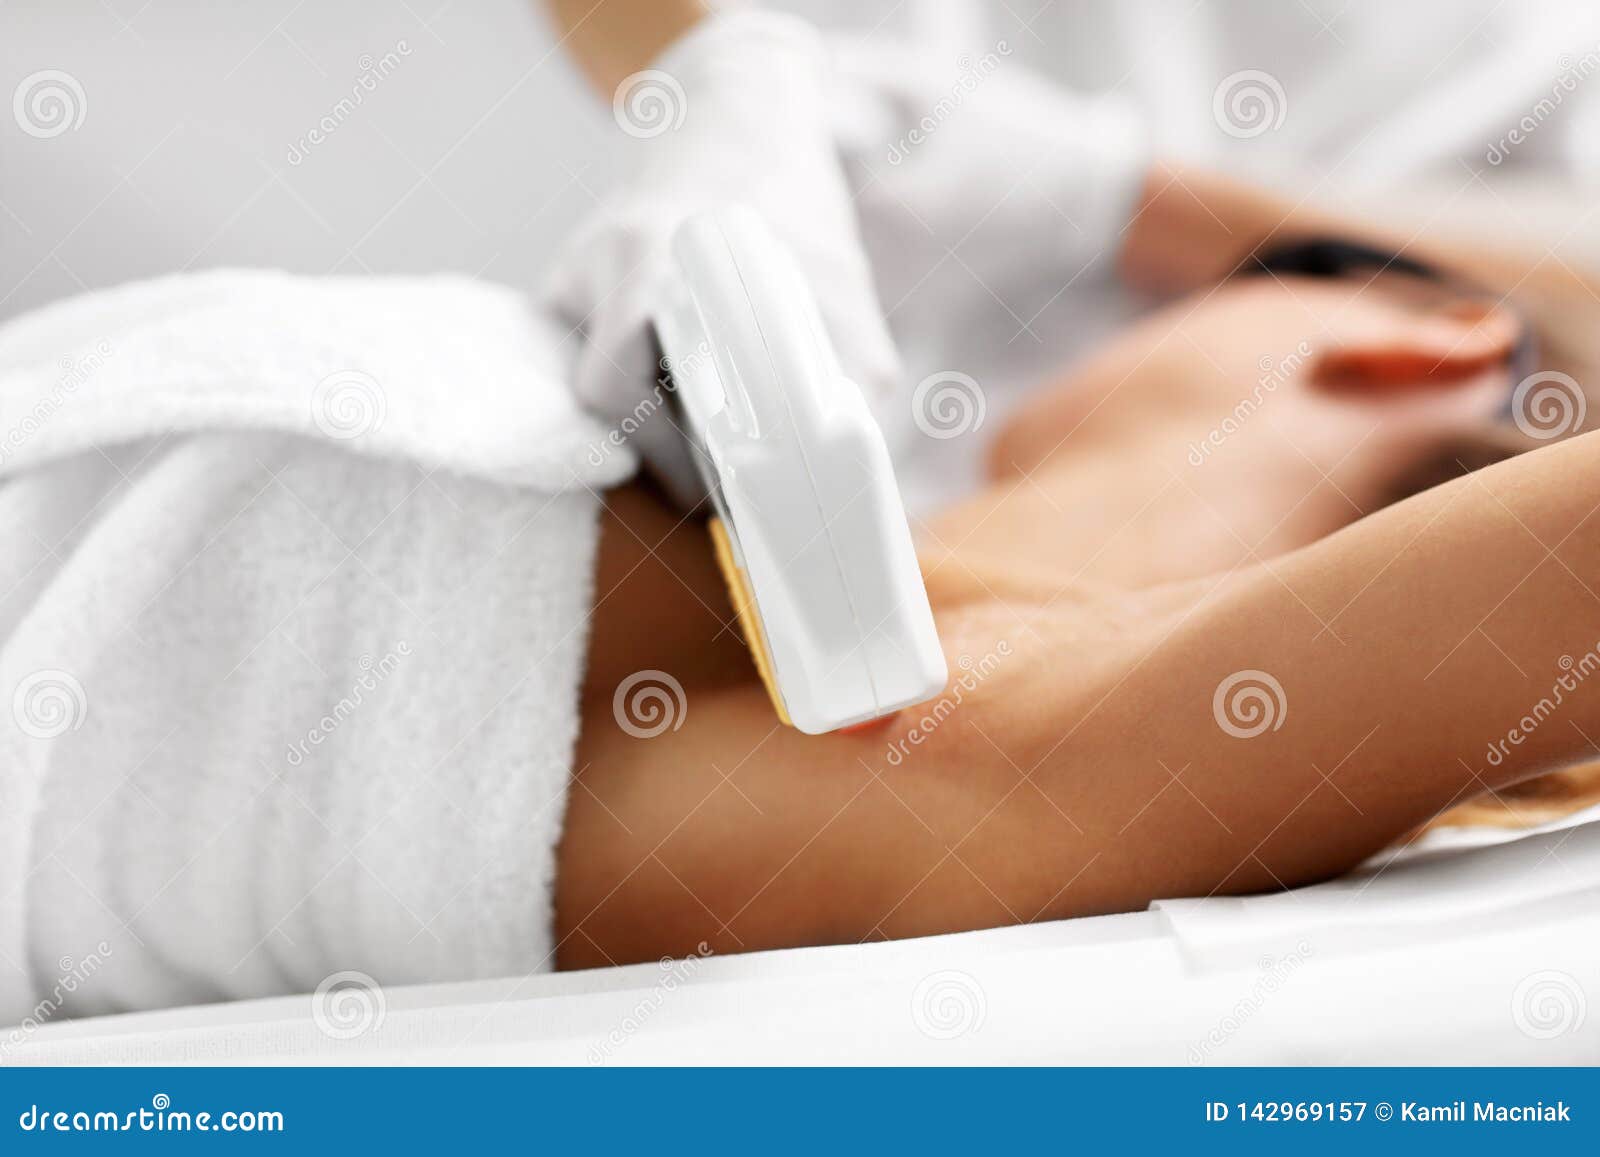 beautician giving epilation laser treatment to woman on armpits